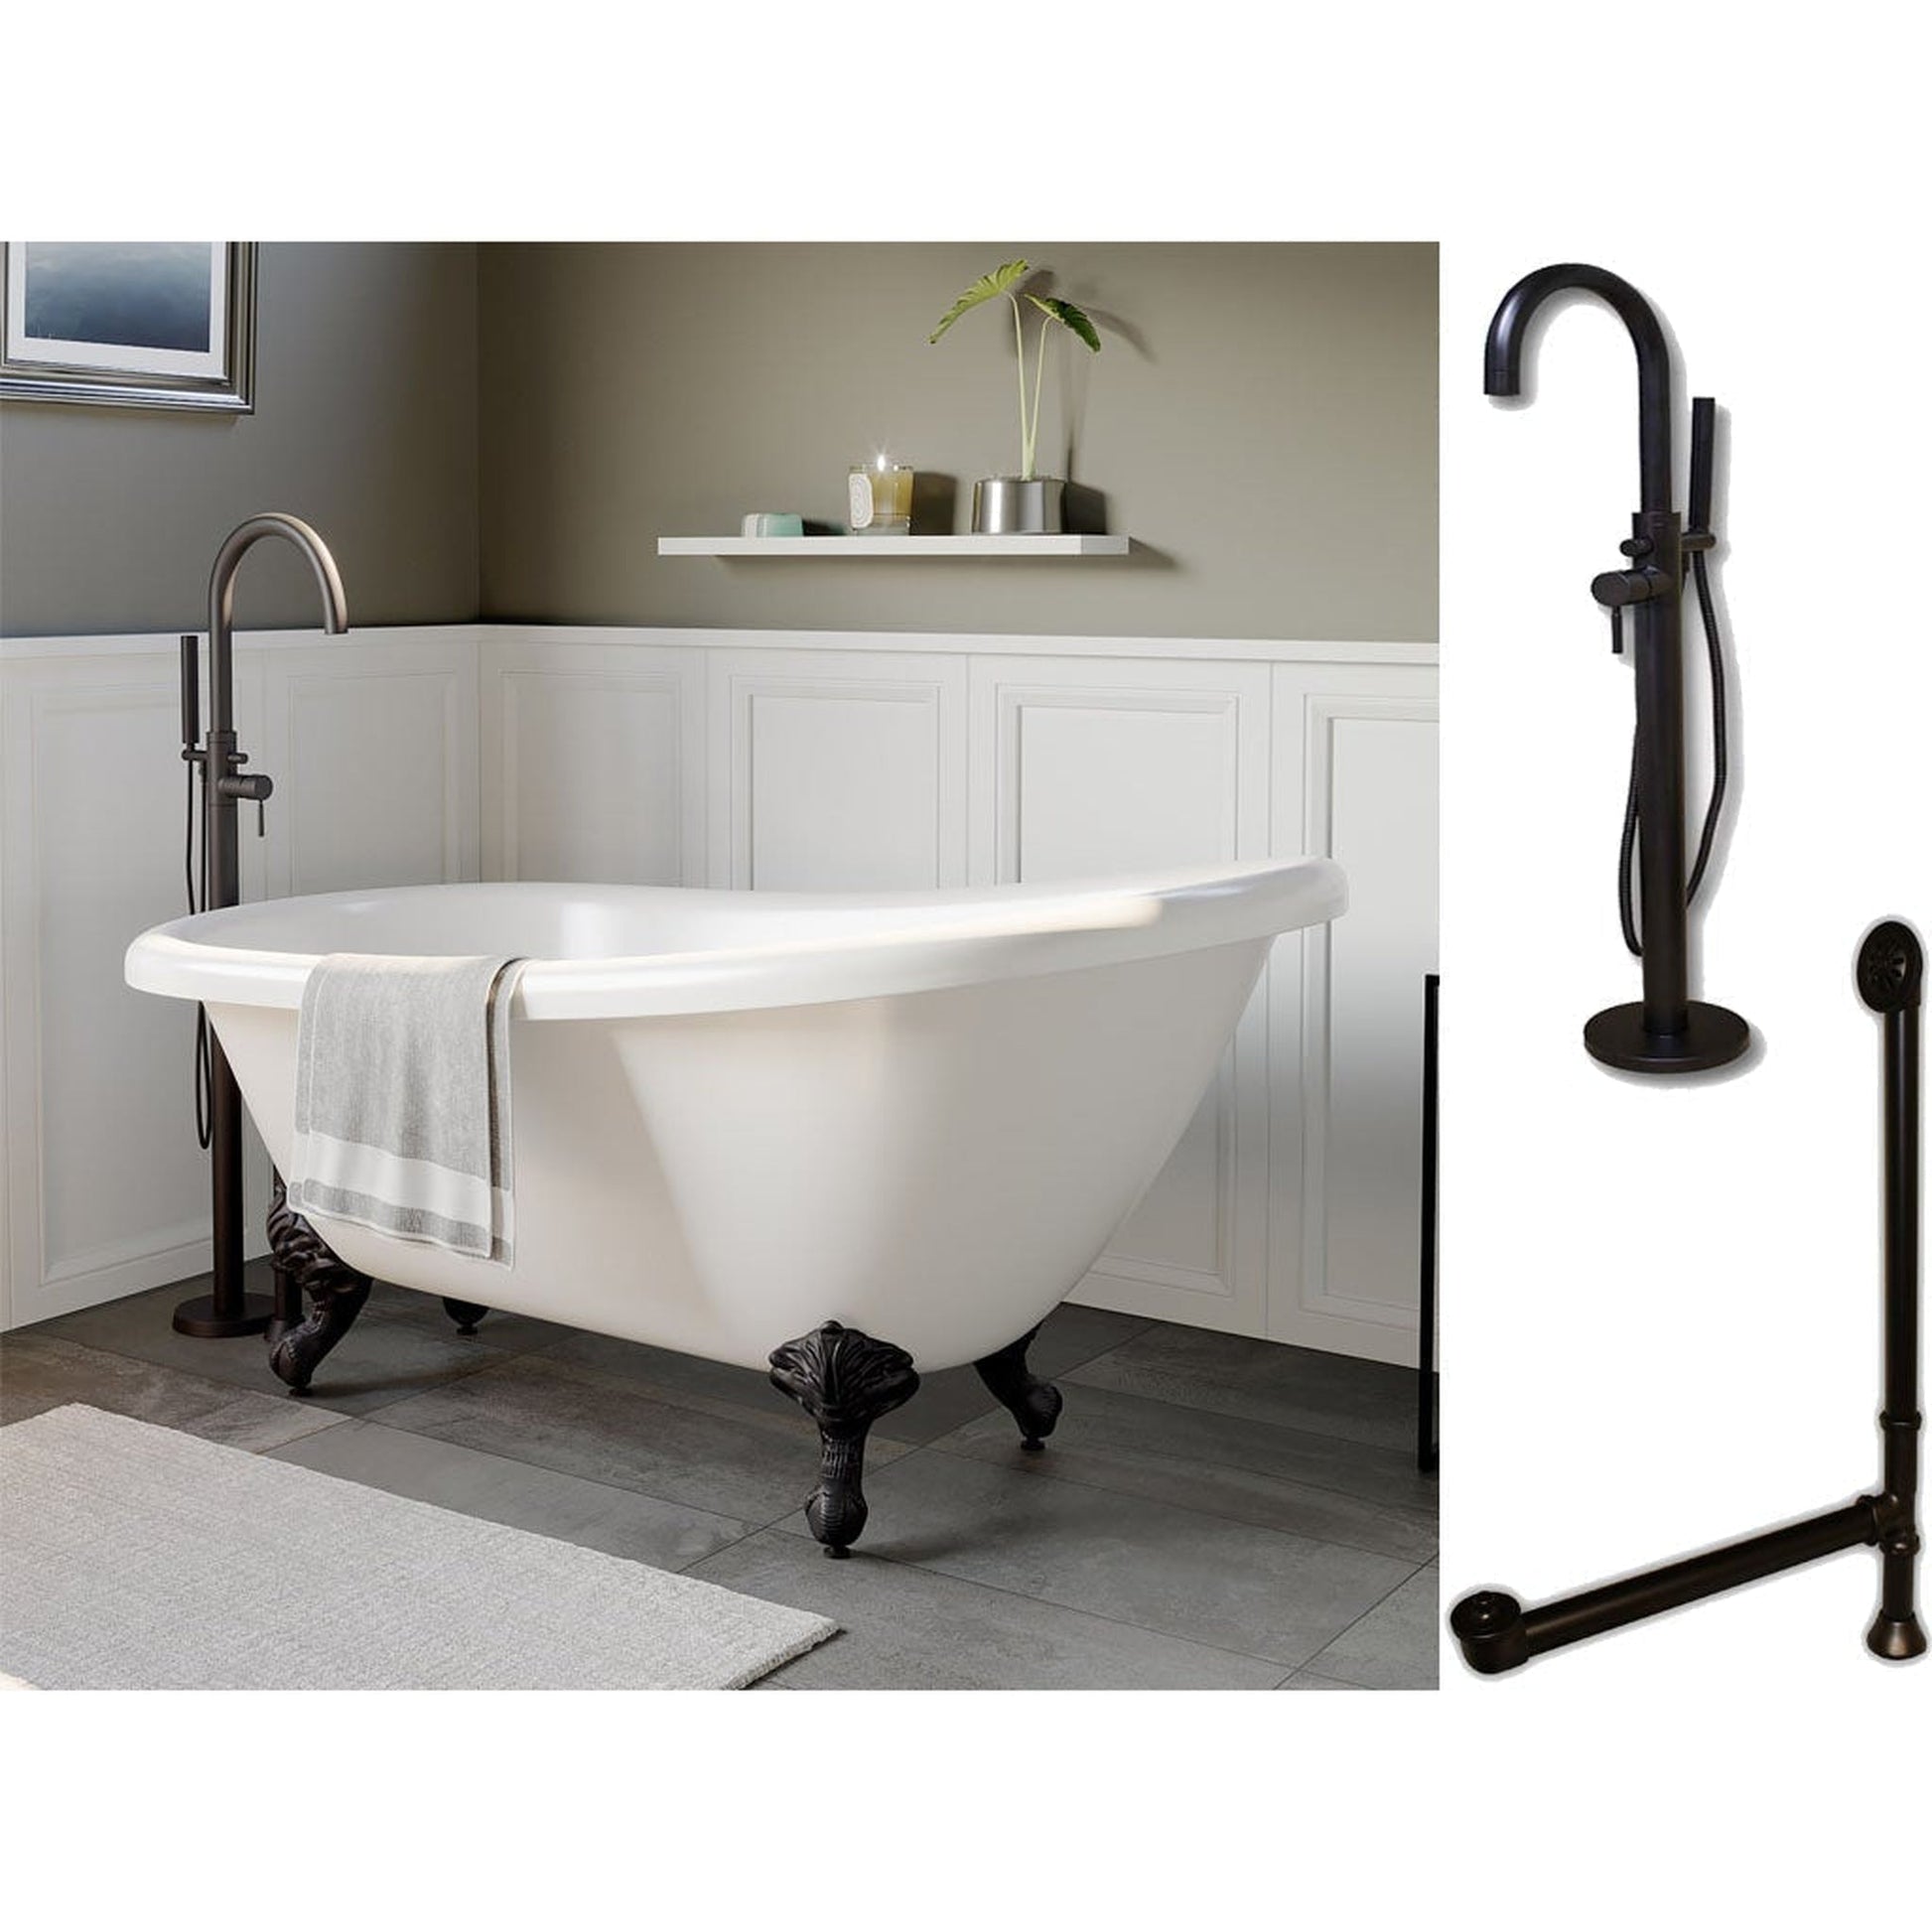 Cambridge Plumbing 67" White Acrylic Single Slipper Clawfeet Bathtub With No Deck Holes And Complete Plumbing Package Including Modern Floor Mounted Faucet, Supply Lines, Drain And Overflow Assembly In Oil Rubbed Bronze